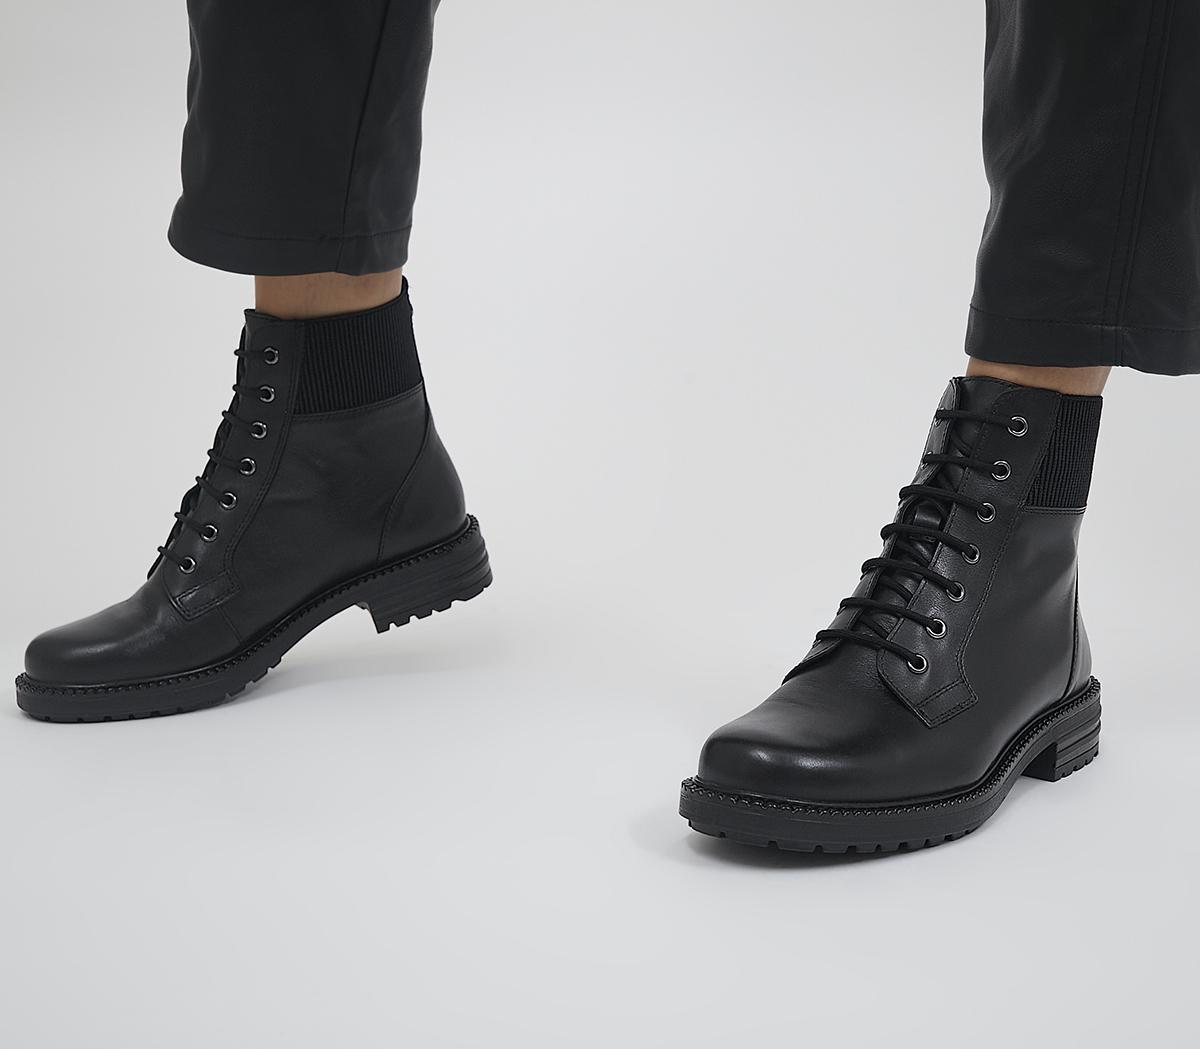 OfficeAoife Elasticated Cuff Lace Up BootsBlack Leather